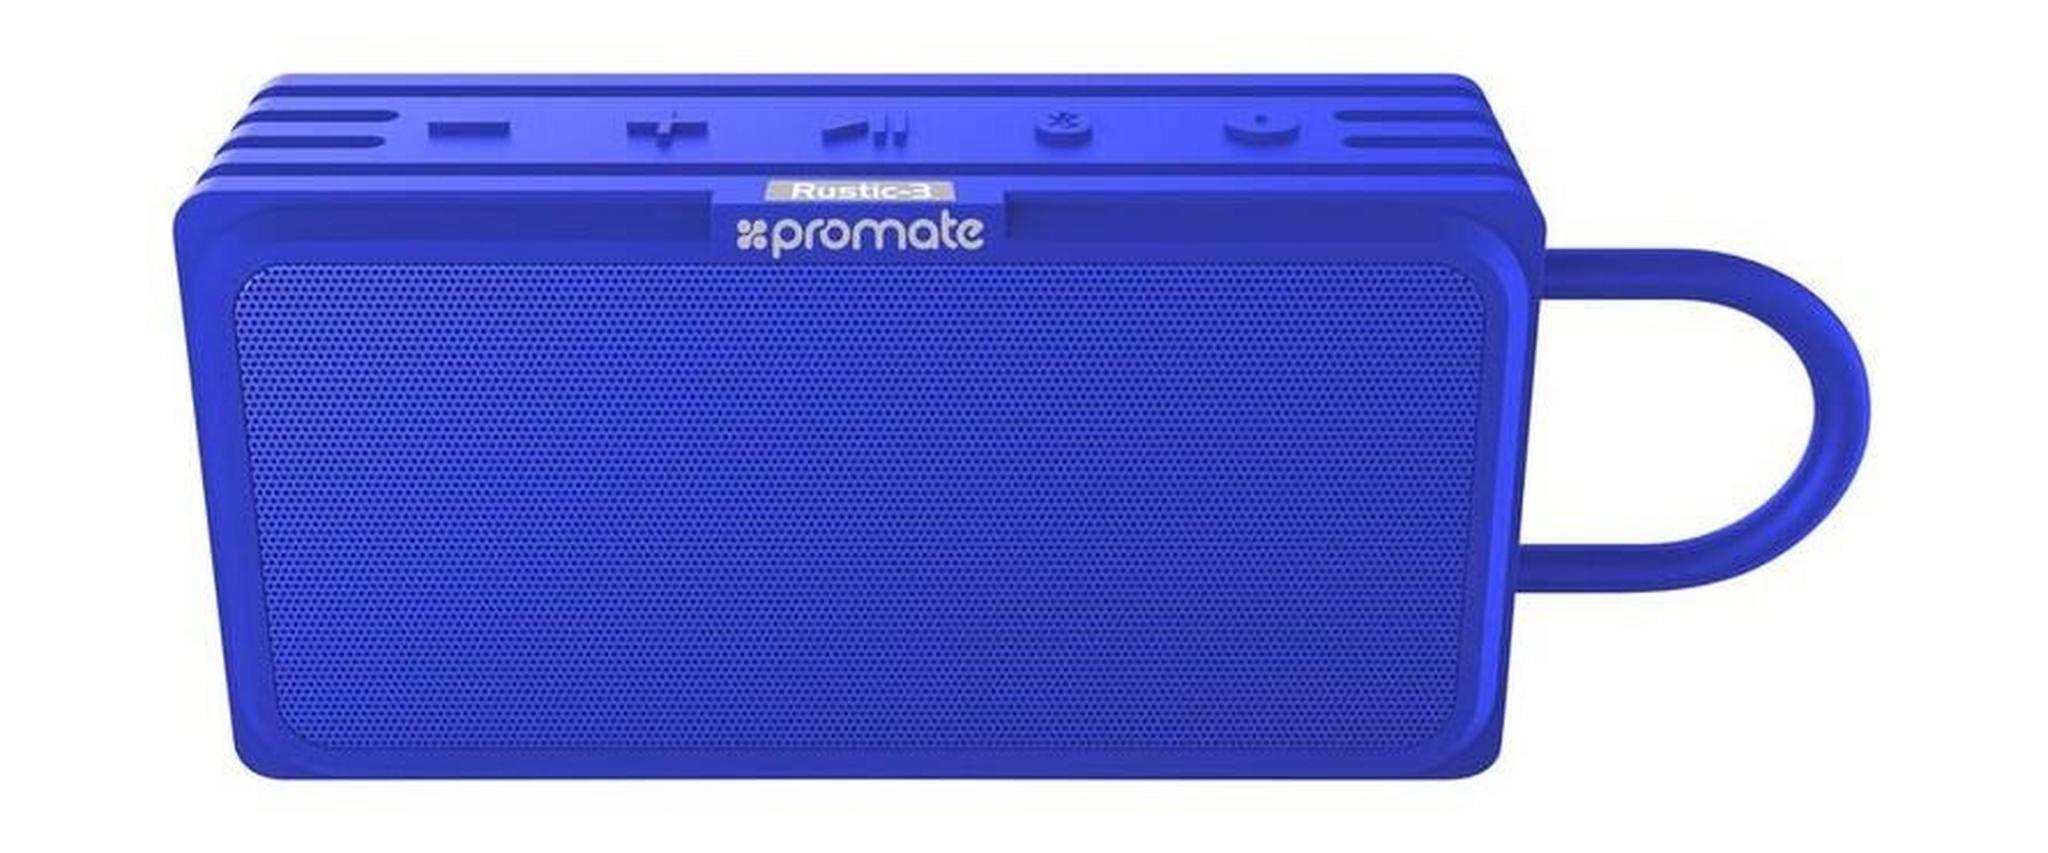 Promate Rustic-3 BT 4.2 With MicroSD Water Resistant Speaker - Blue